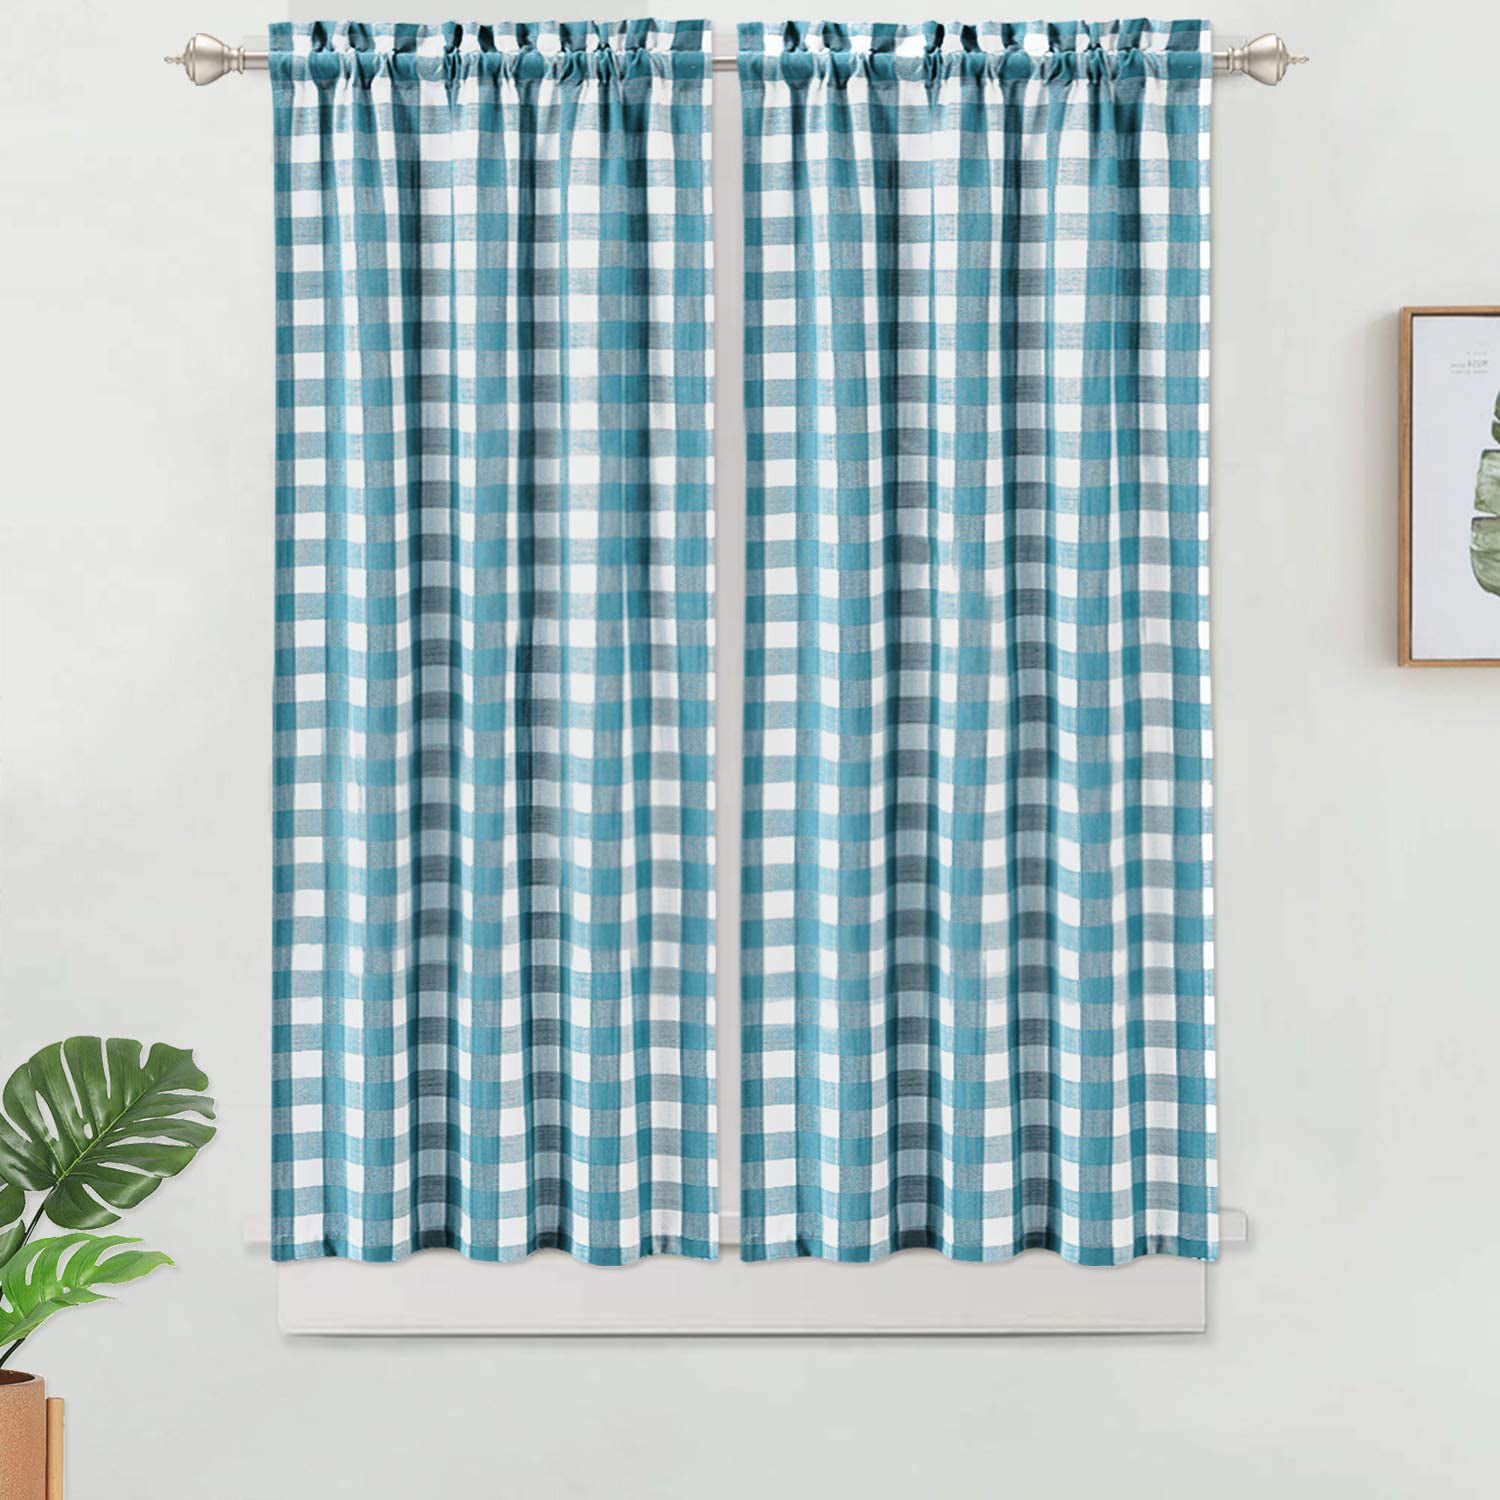 Featured image of post Green Plaid Kitchen Curtains / Fmfunctex green kitchen curtains 36 grey tree print on white tier curtain set for small windows basement room bathroom, 2 panels.